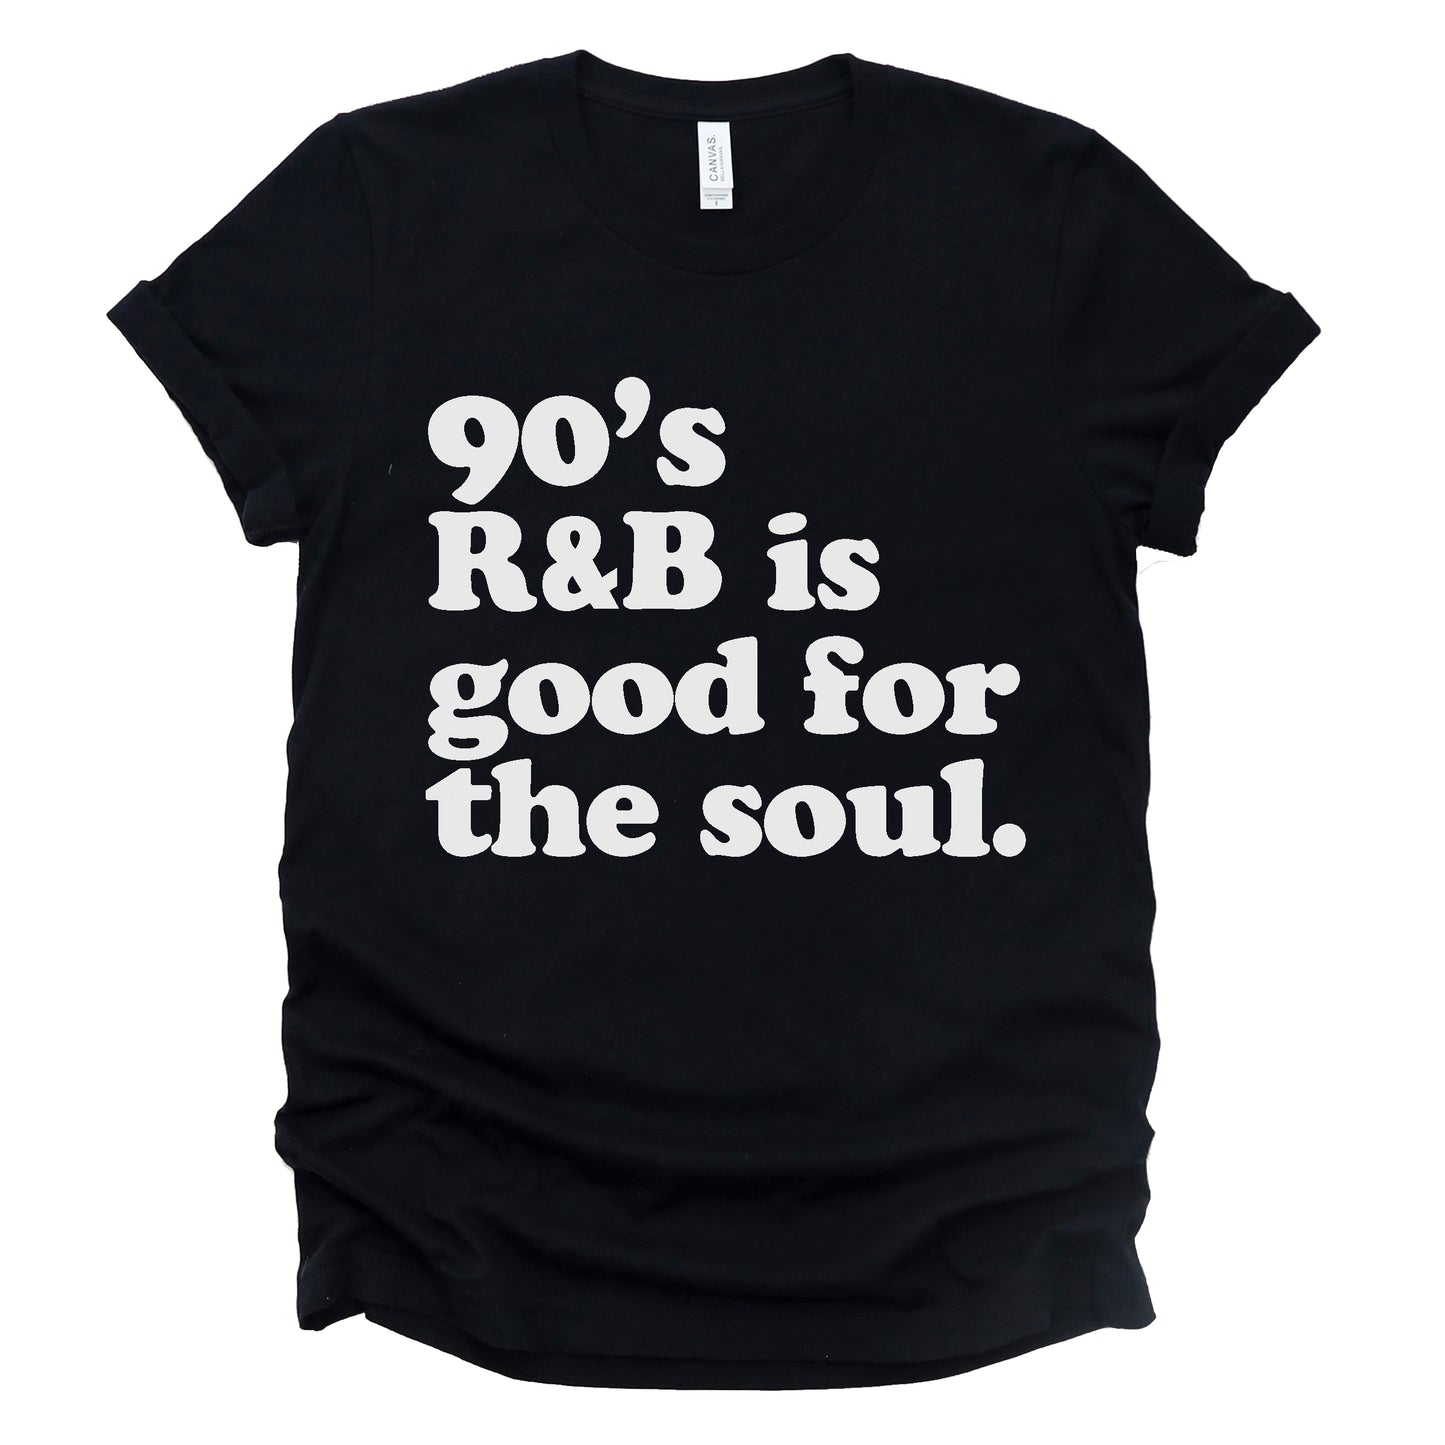 "90's R&B Is Good For The Soul" Tee